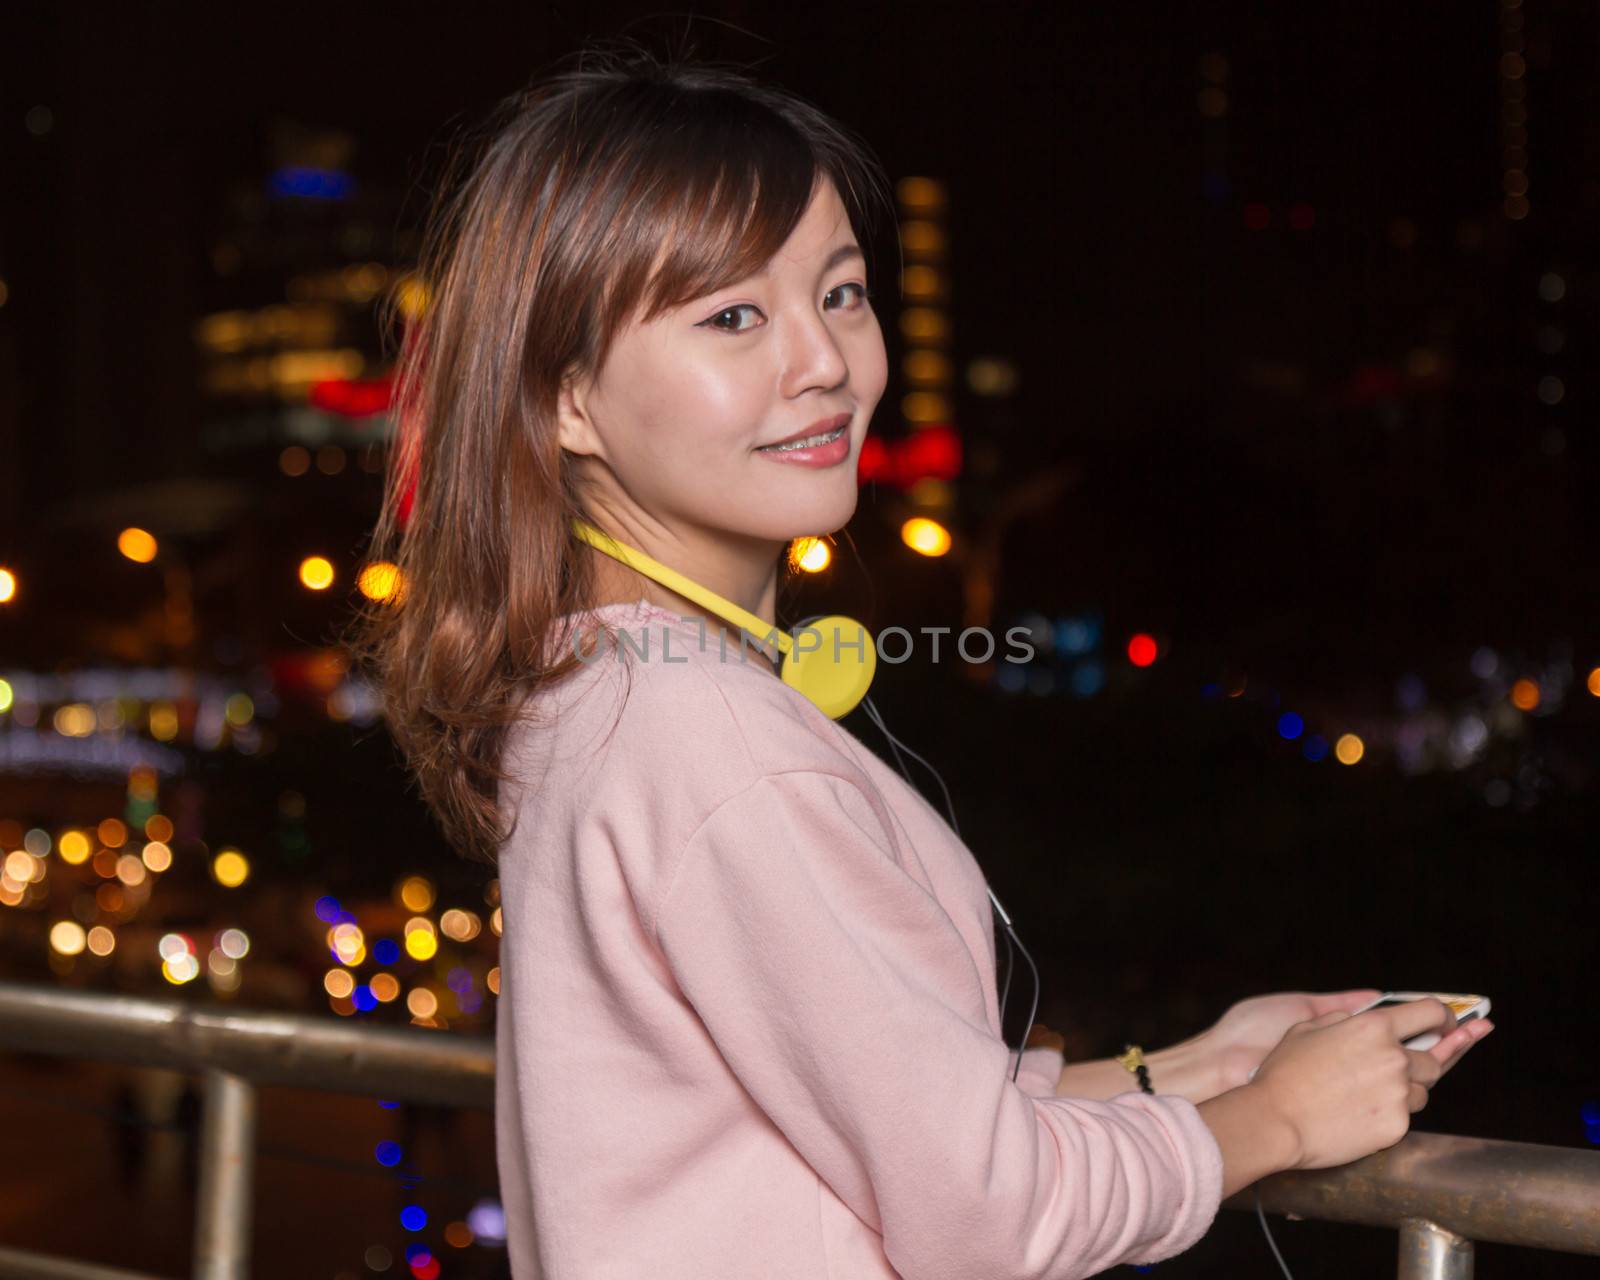 Beautiful Asian woman with smart phone and yellow headphones  by imagesbykenny